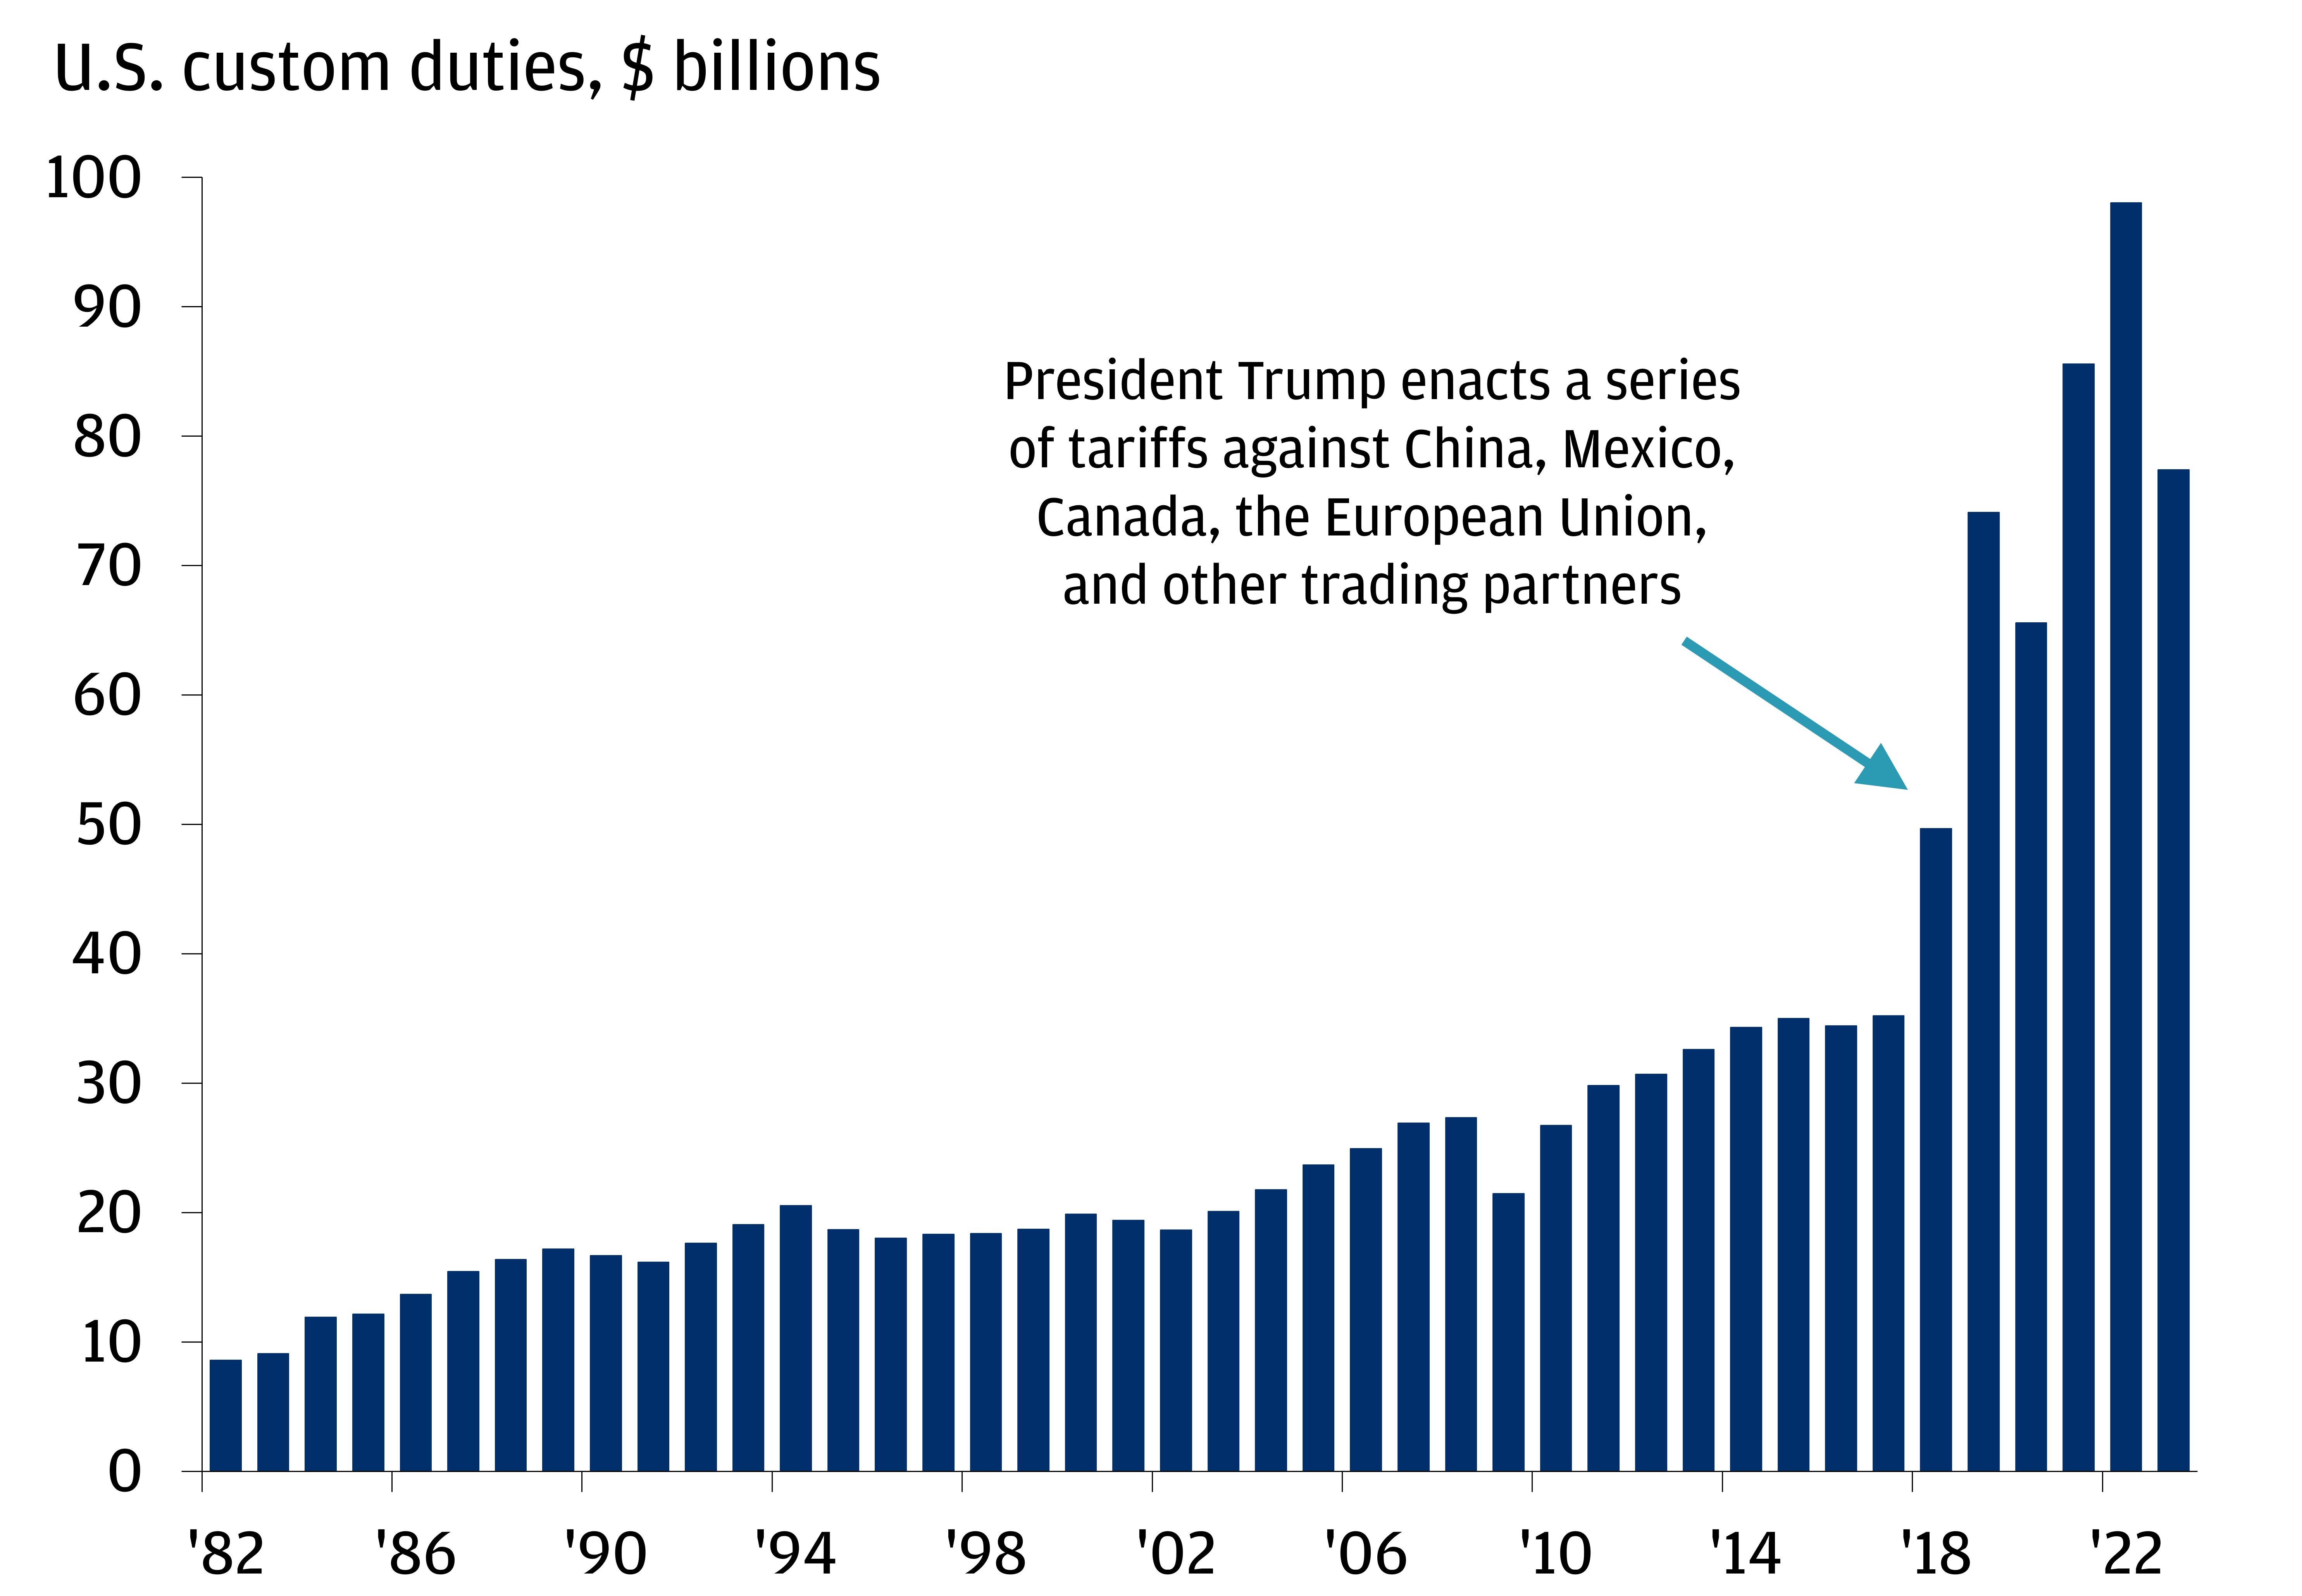 This bar chart shows the U.S. custom duties from 1982 to 2023.